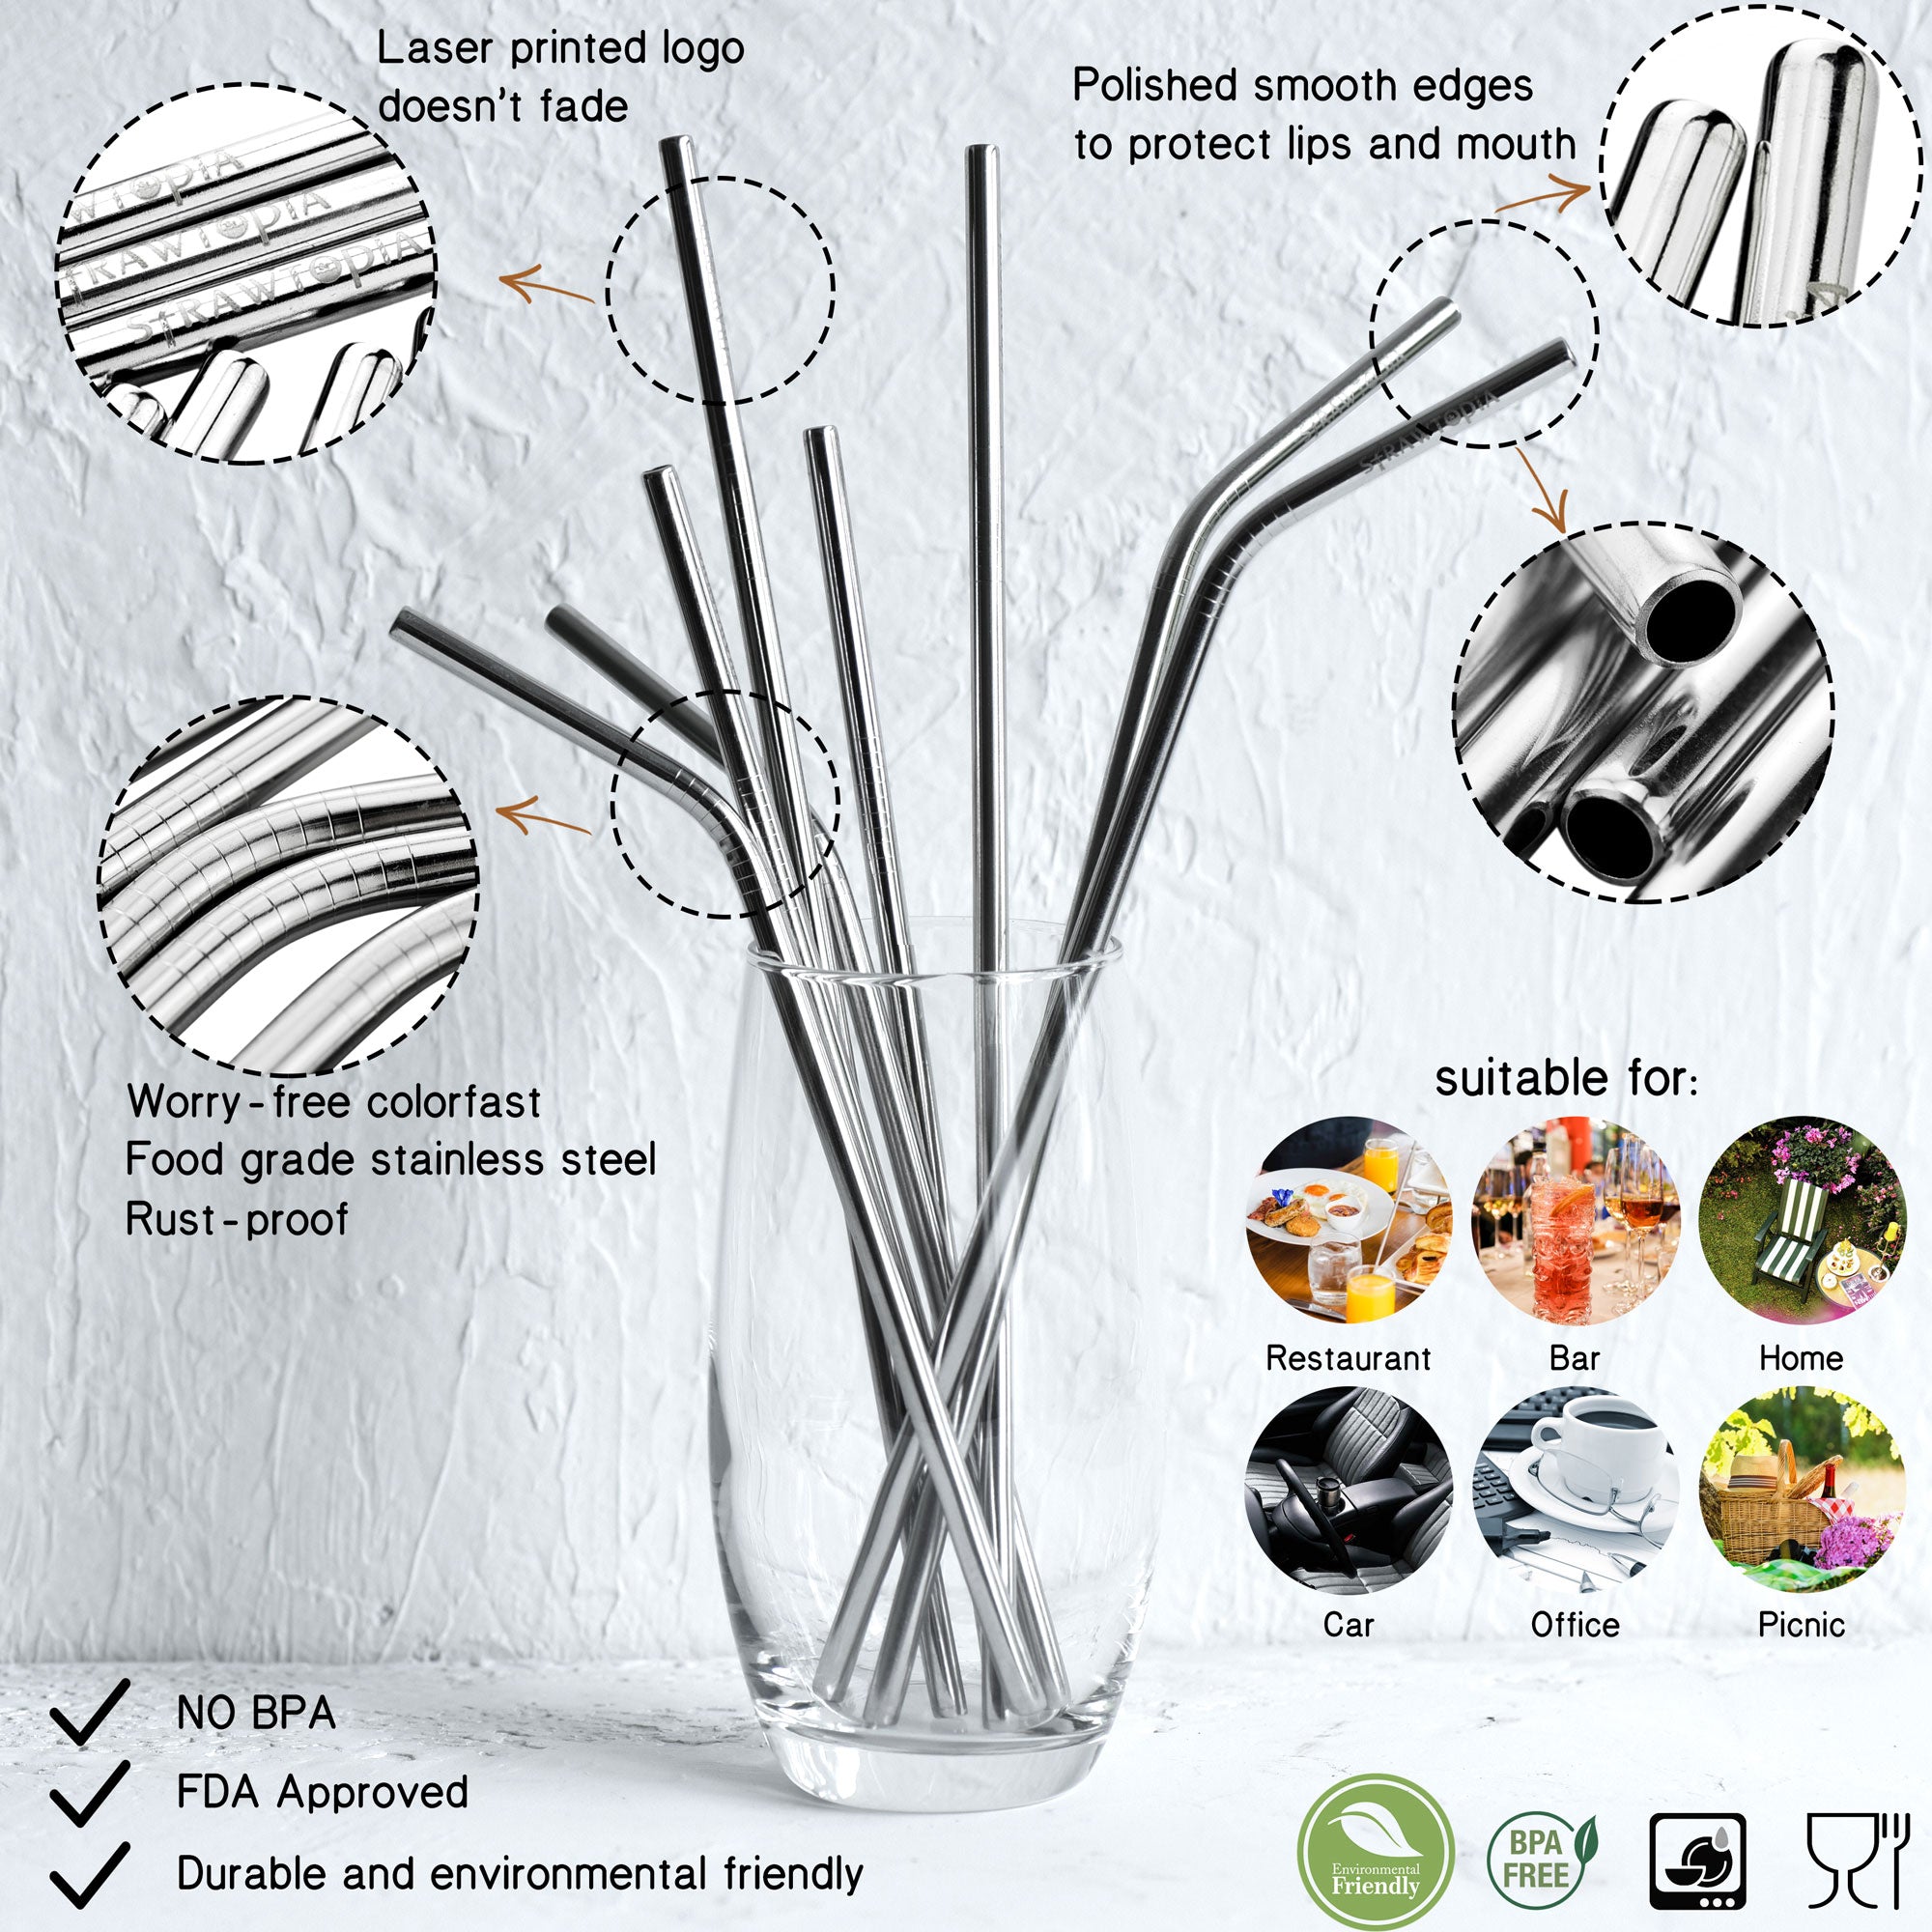 11 PC Set Reusable Metal Straws with Cleaning Brushes 8.5 inches